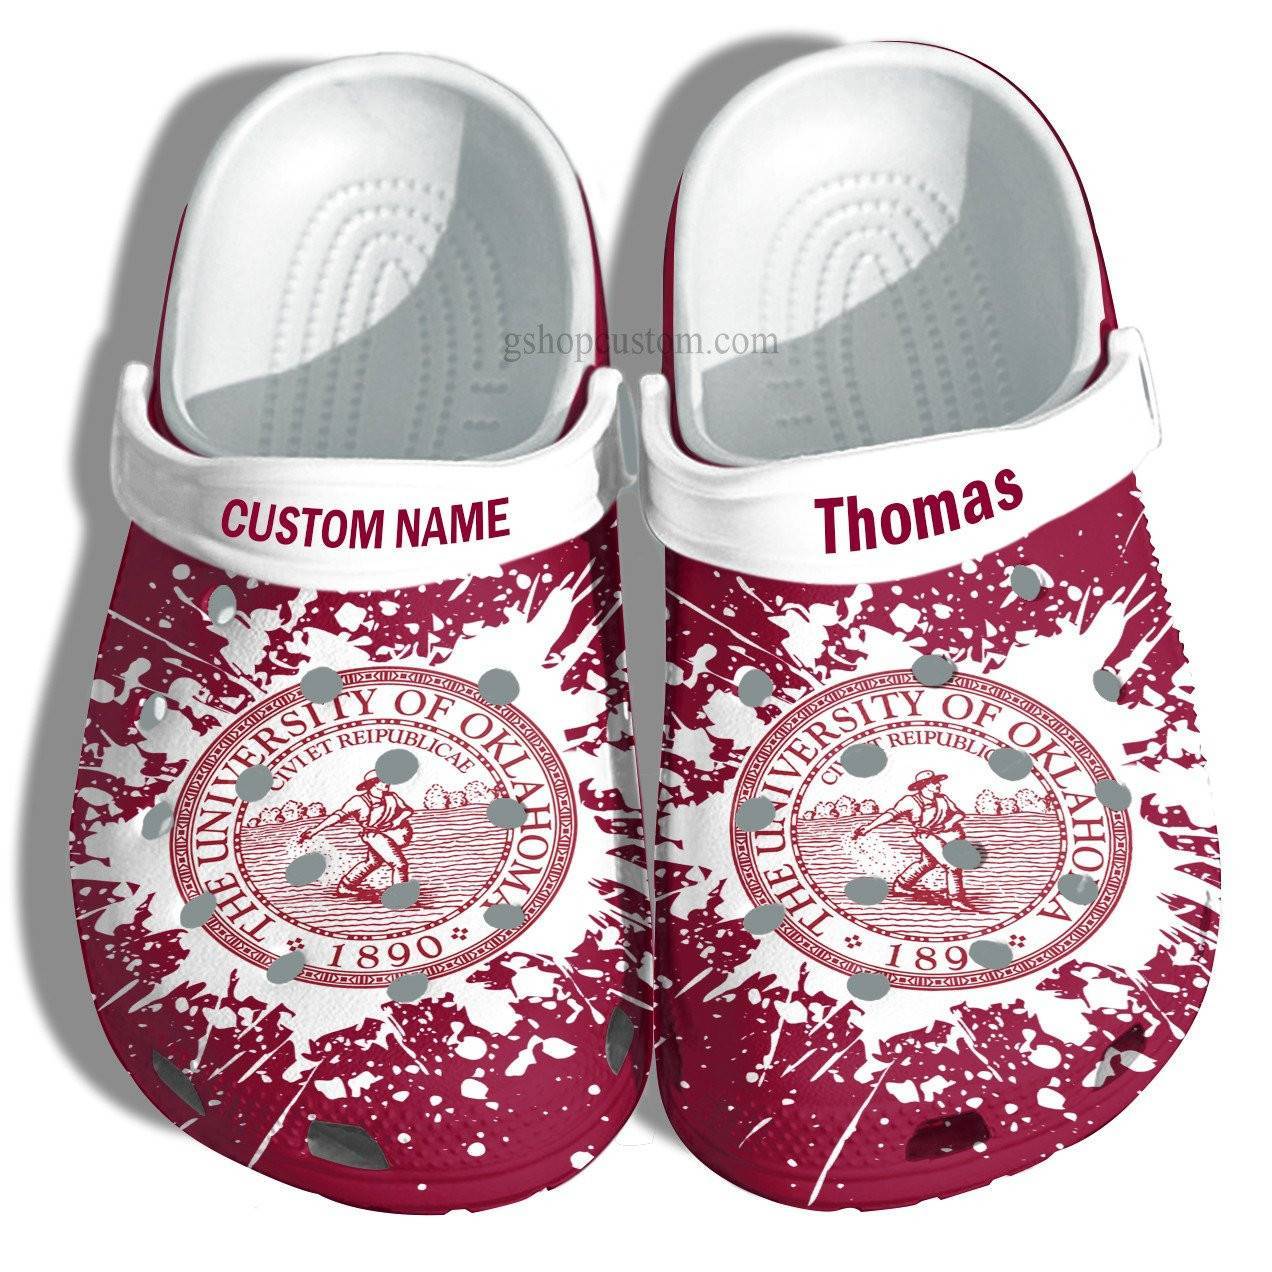 The University Of Oklahoma Graduation Gifts Croc Shoes Customize – Admission Gift Crocss Shoes For Men Women